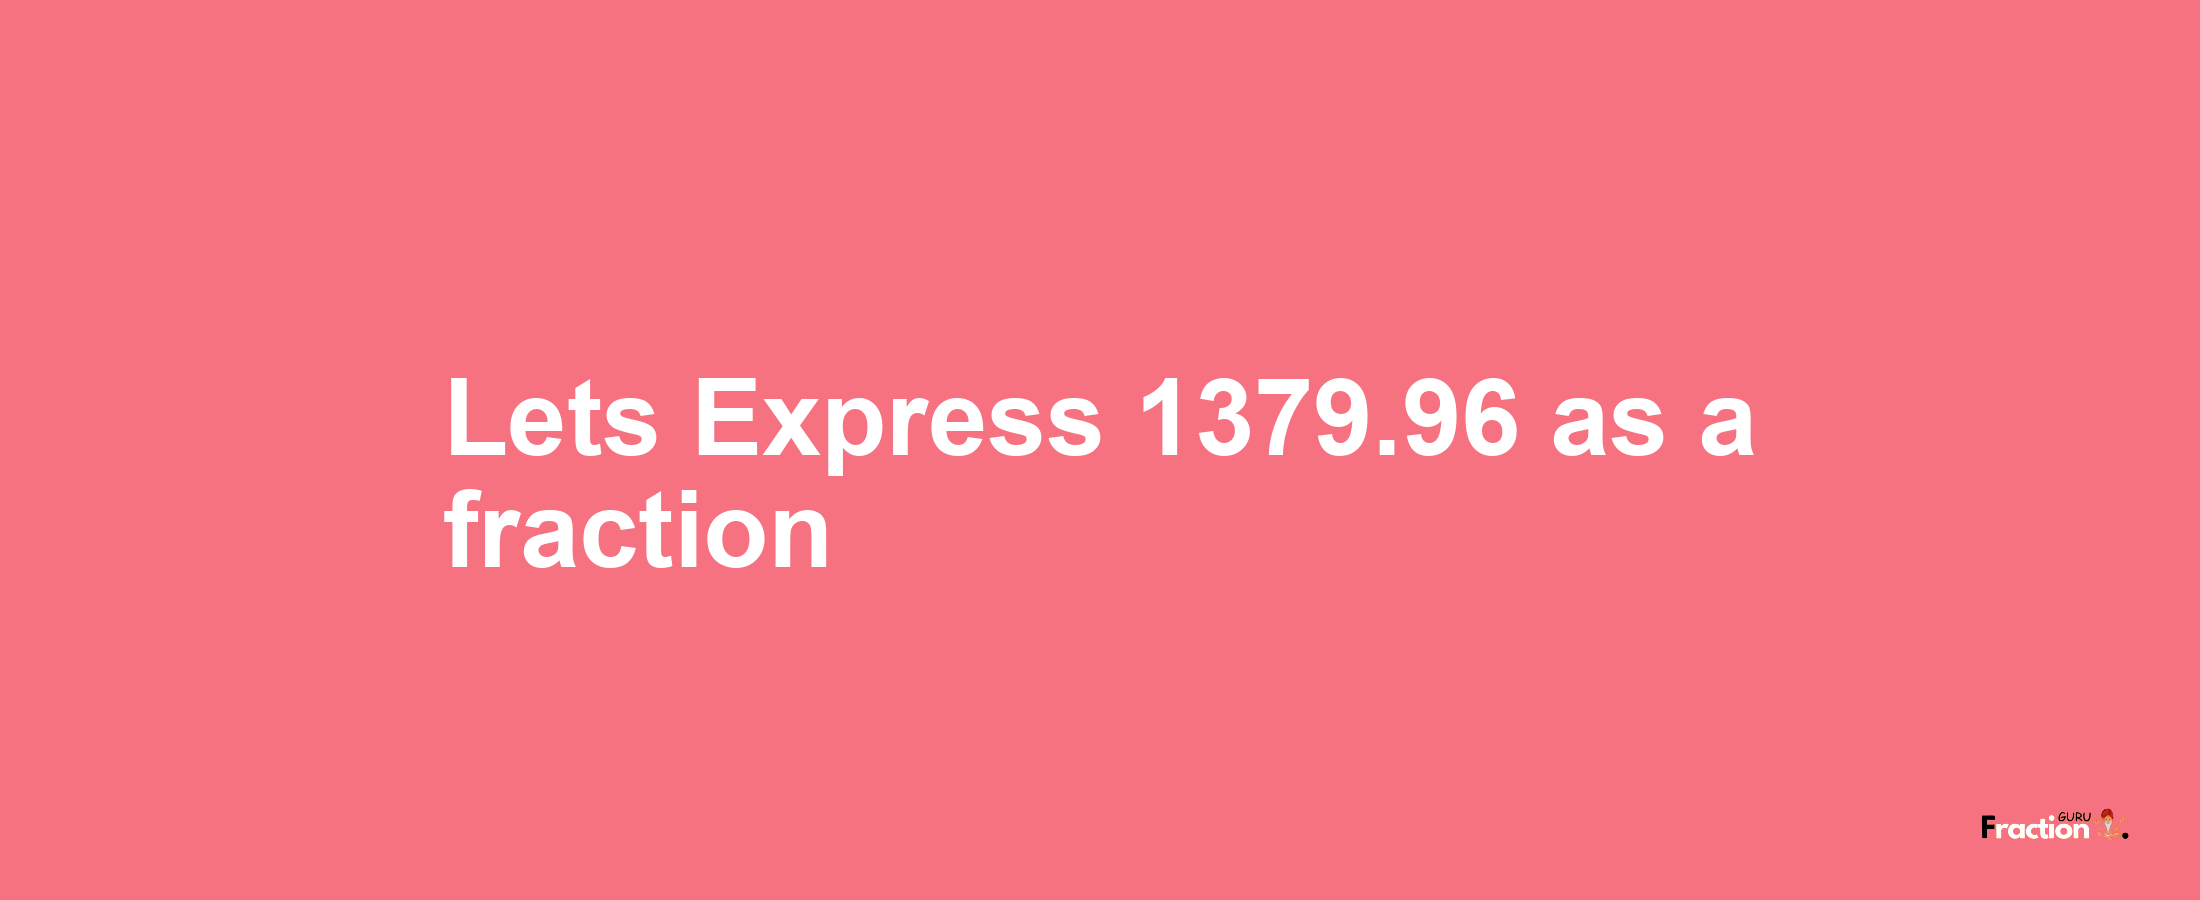 Lets Express 1379.96 as afraction